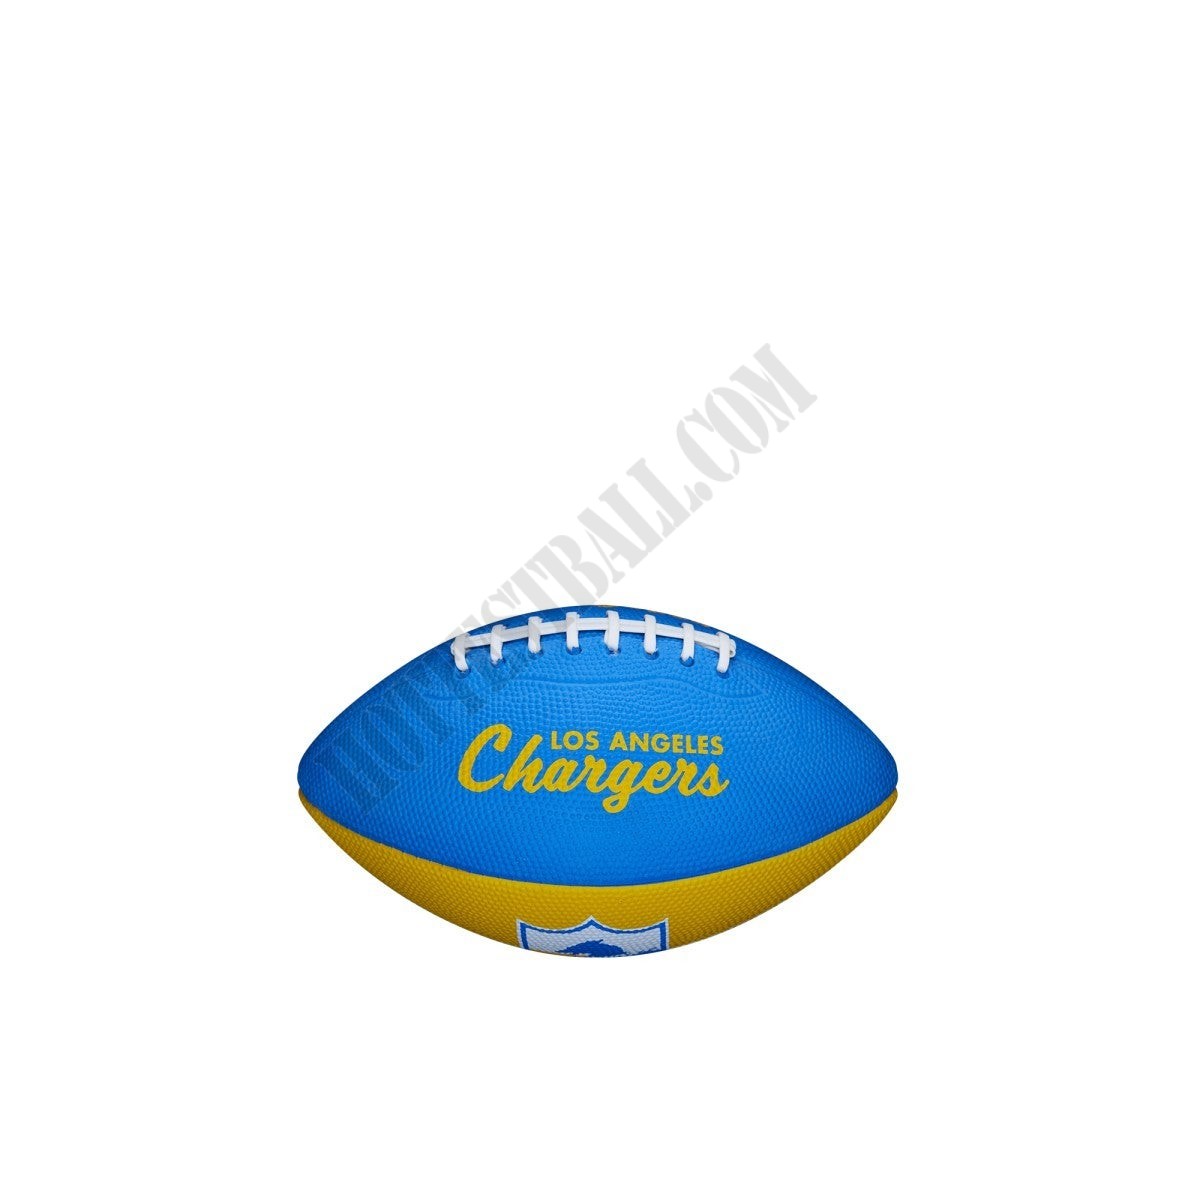 NFL Retro Mini Football - Los Angeles Chargers - Wilson Discount Store - -0